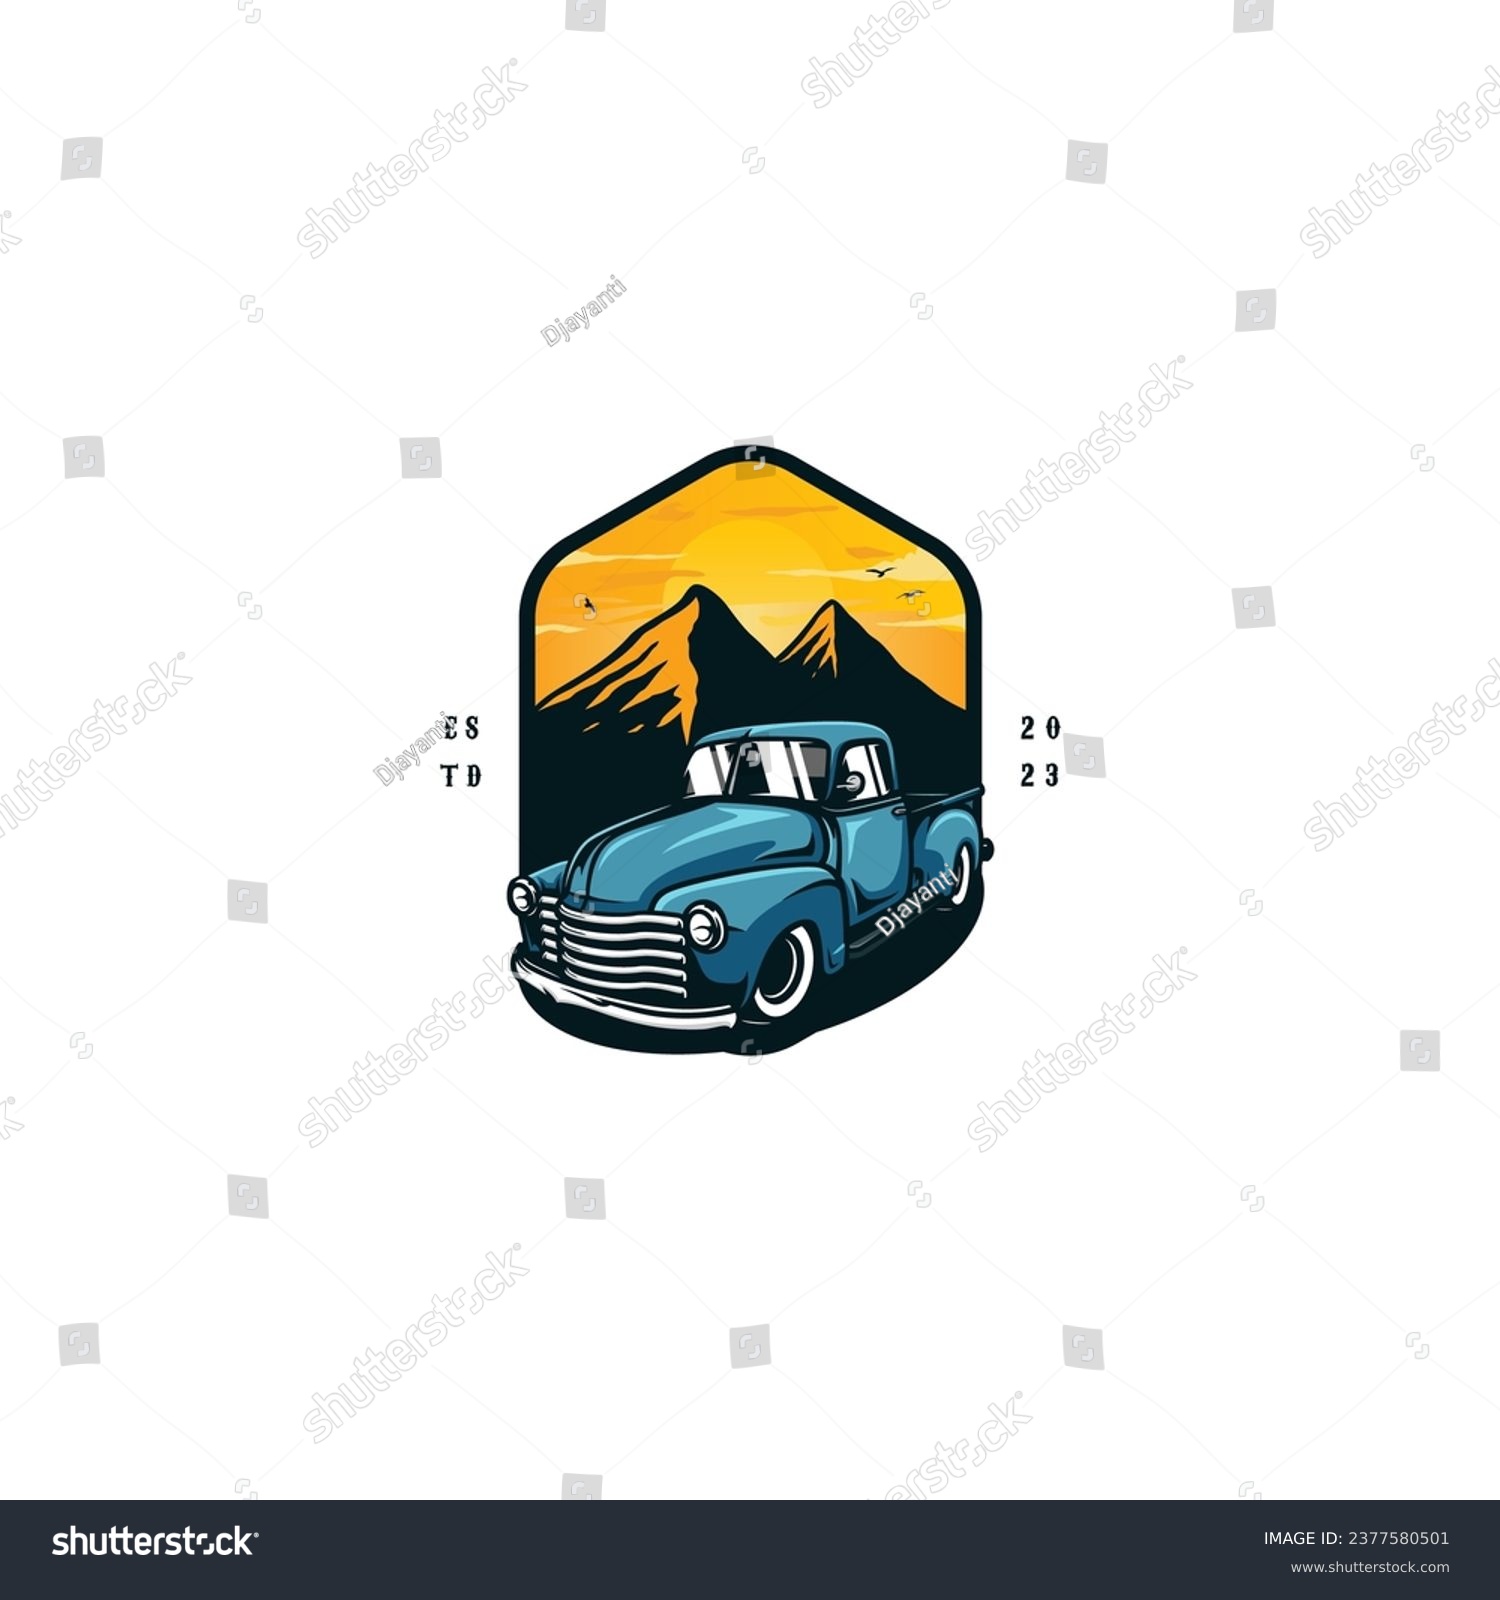 SVG of A logo or illustration depicting a blue classic truck against a sunset background, with the silhouette of a mountain and birds in flight svg